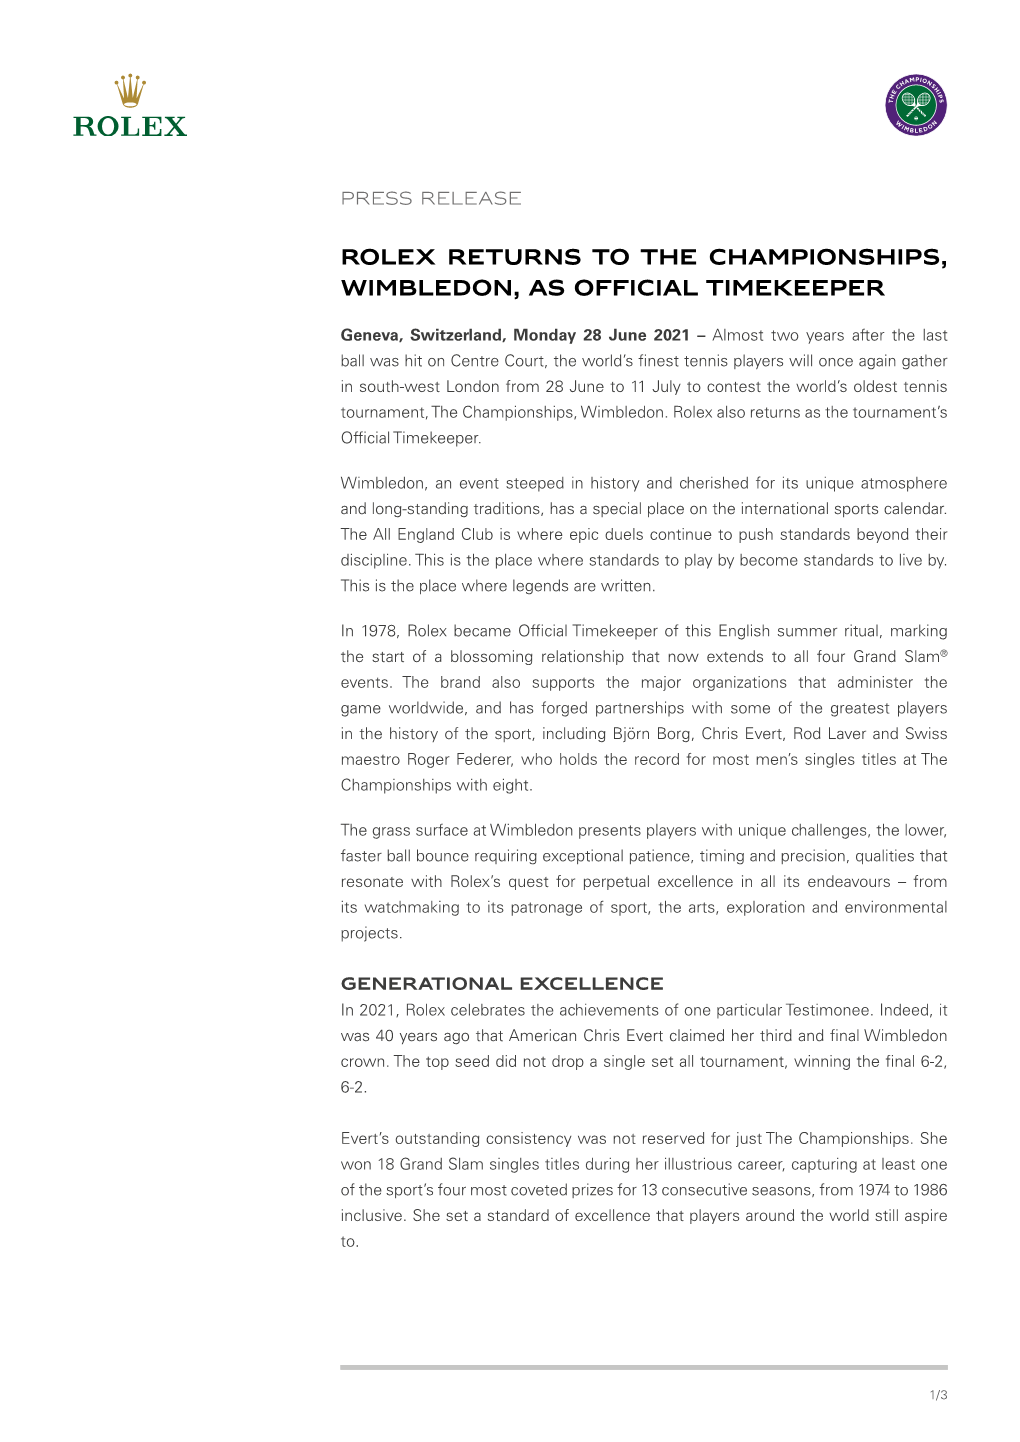 Rolex Returns to the Championships, Wimbledon, As Official Timekeeper